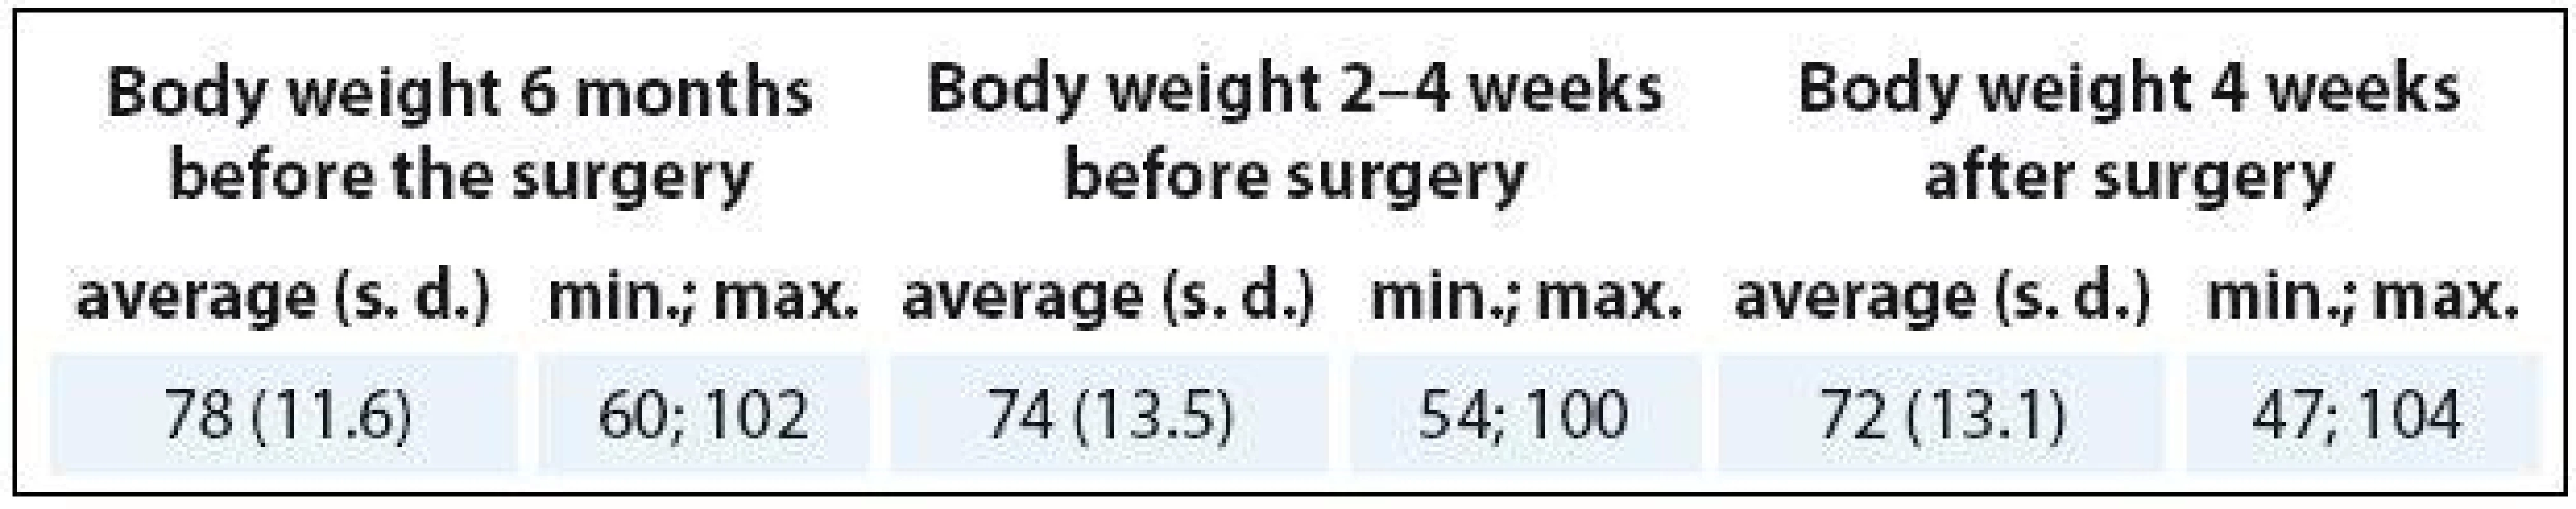 Body weight before and after surgery.